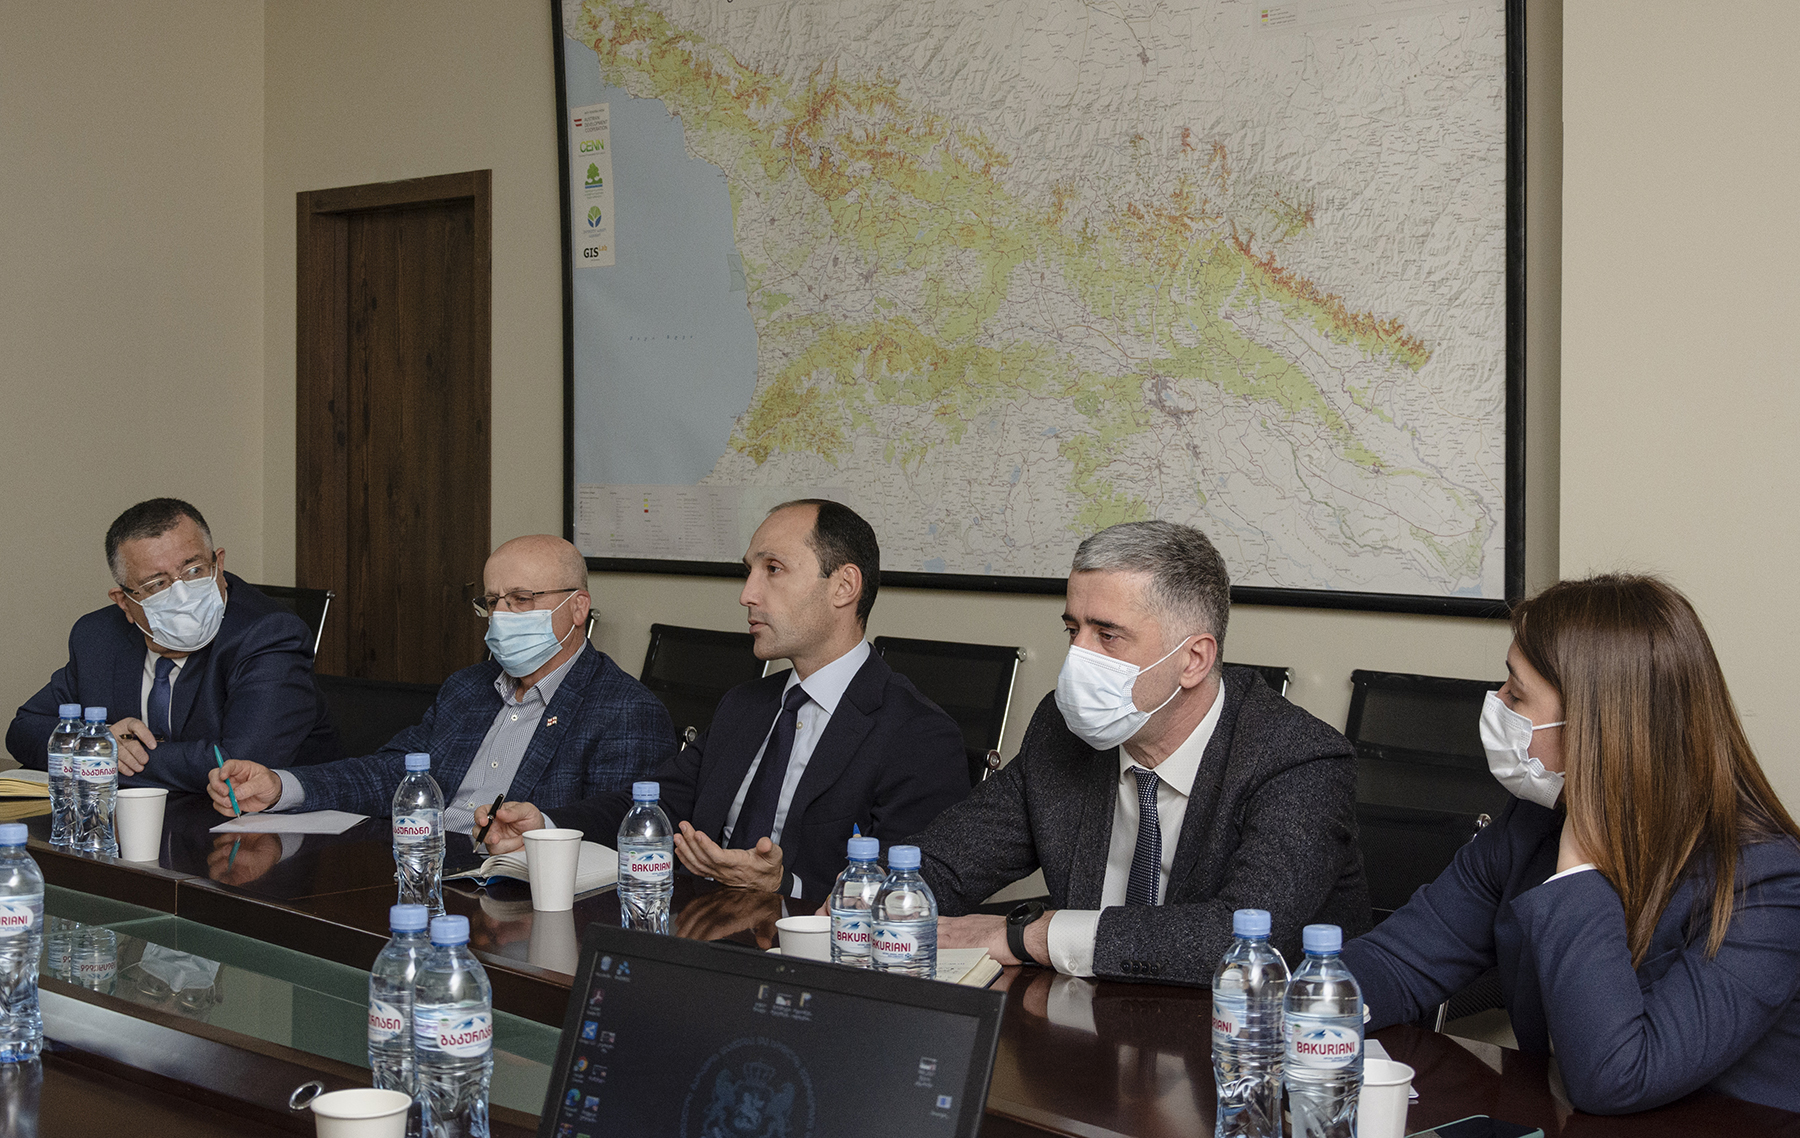 Minister of Environmental Protection and Agriculture Levan Davitashvili met with the management of the National Forestry Agency